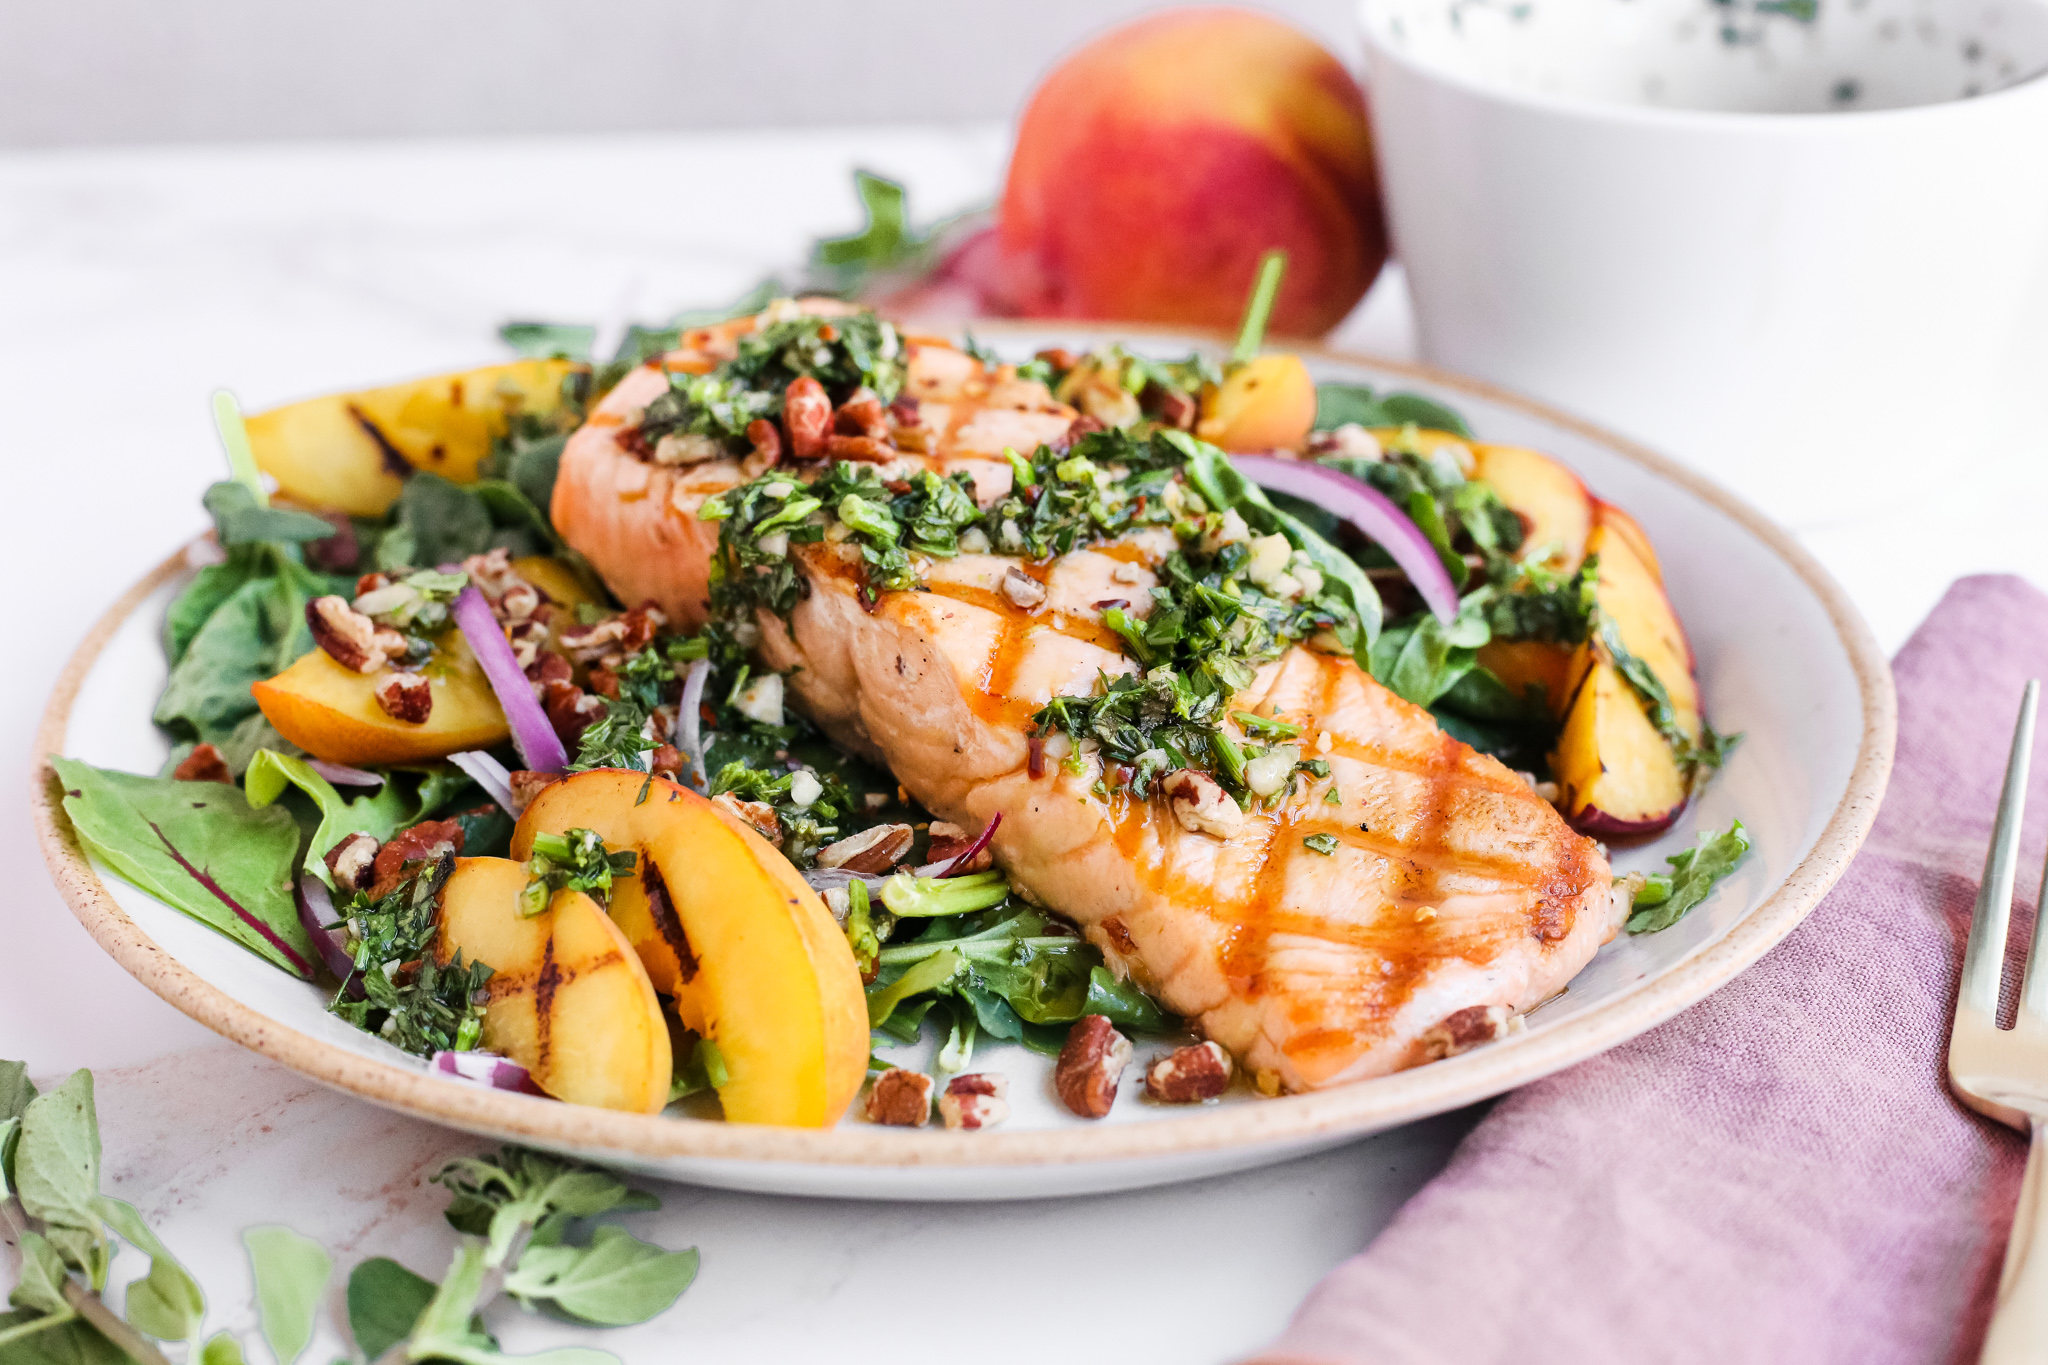 Landscape image of a seared piece of salmon with prominent grill marks, served on a bed of leafy salad greens with grilled peach slices, red onions, pecans, and a chunky chimichurri 